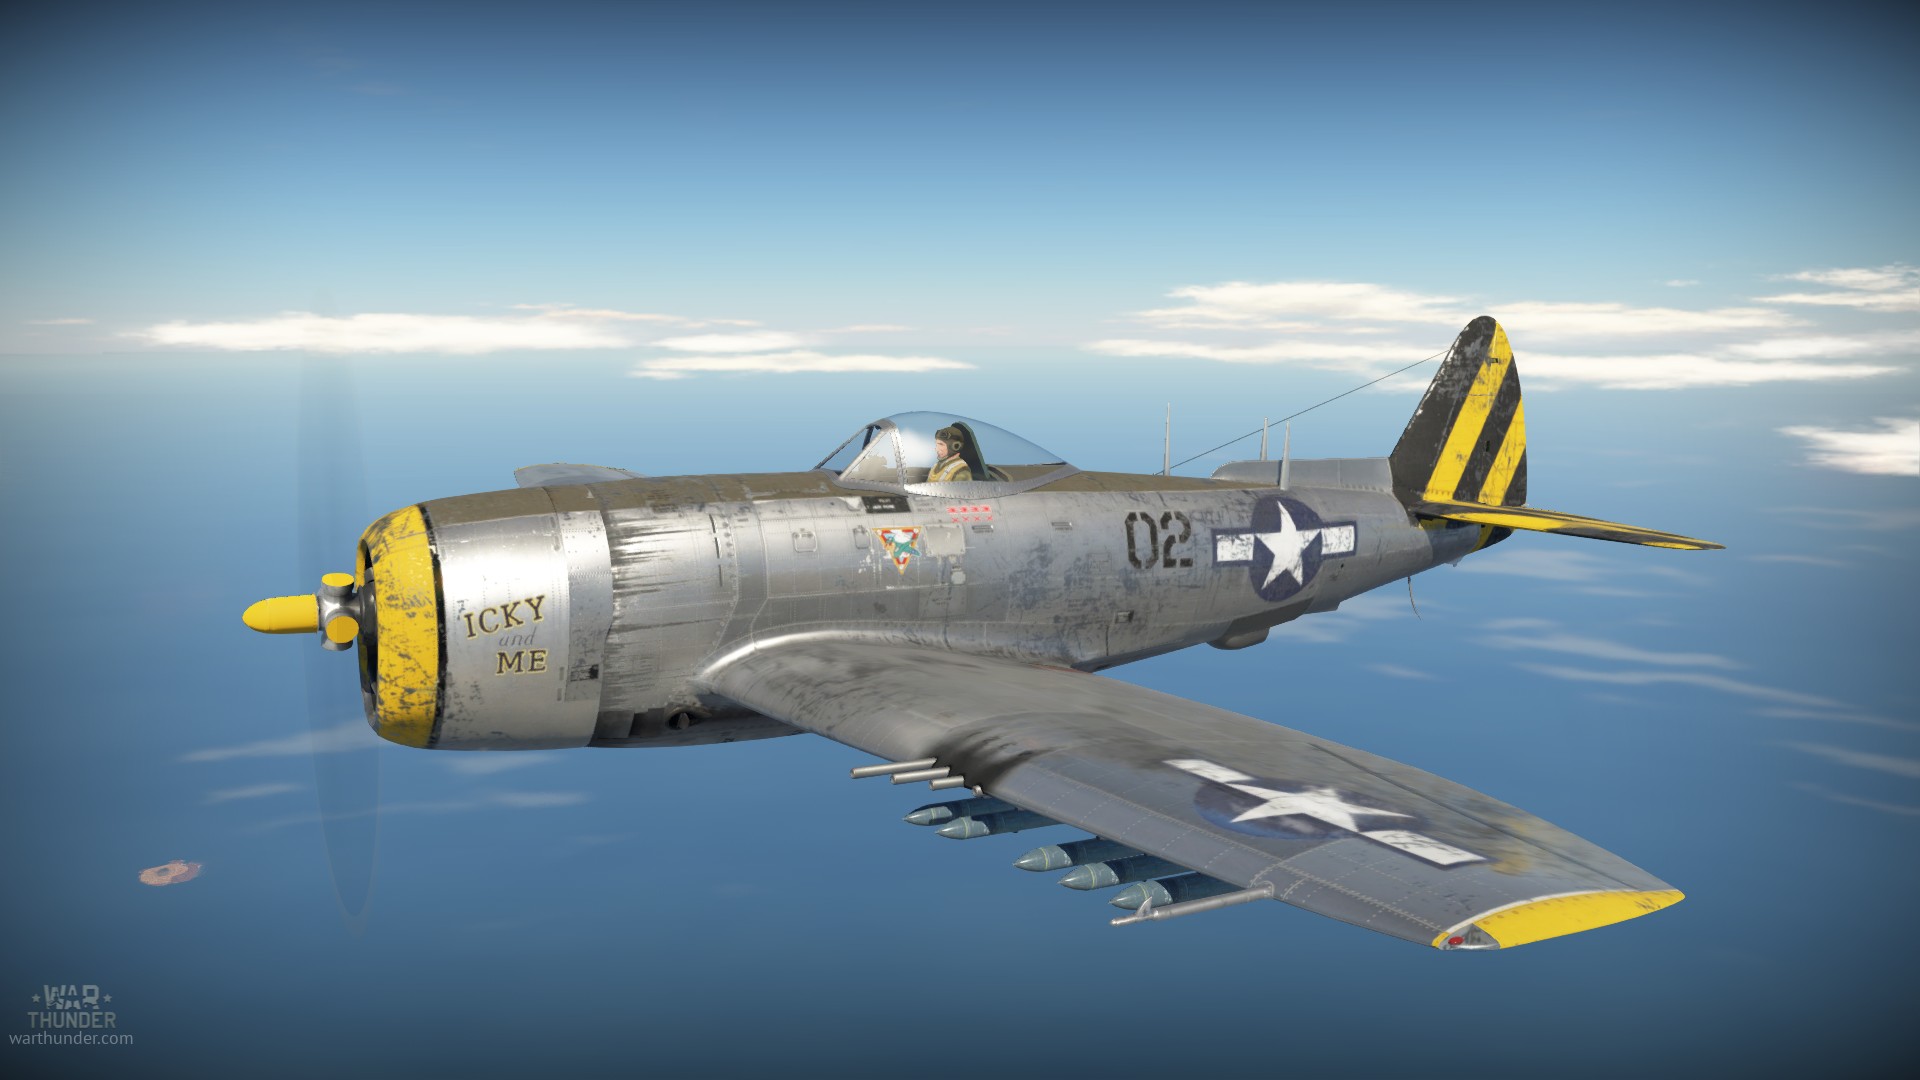 – ICKY AND ME – Republic P-47N Thunderbolt 333rd Fighter Squadron, 318th Fi...